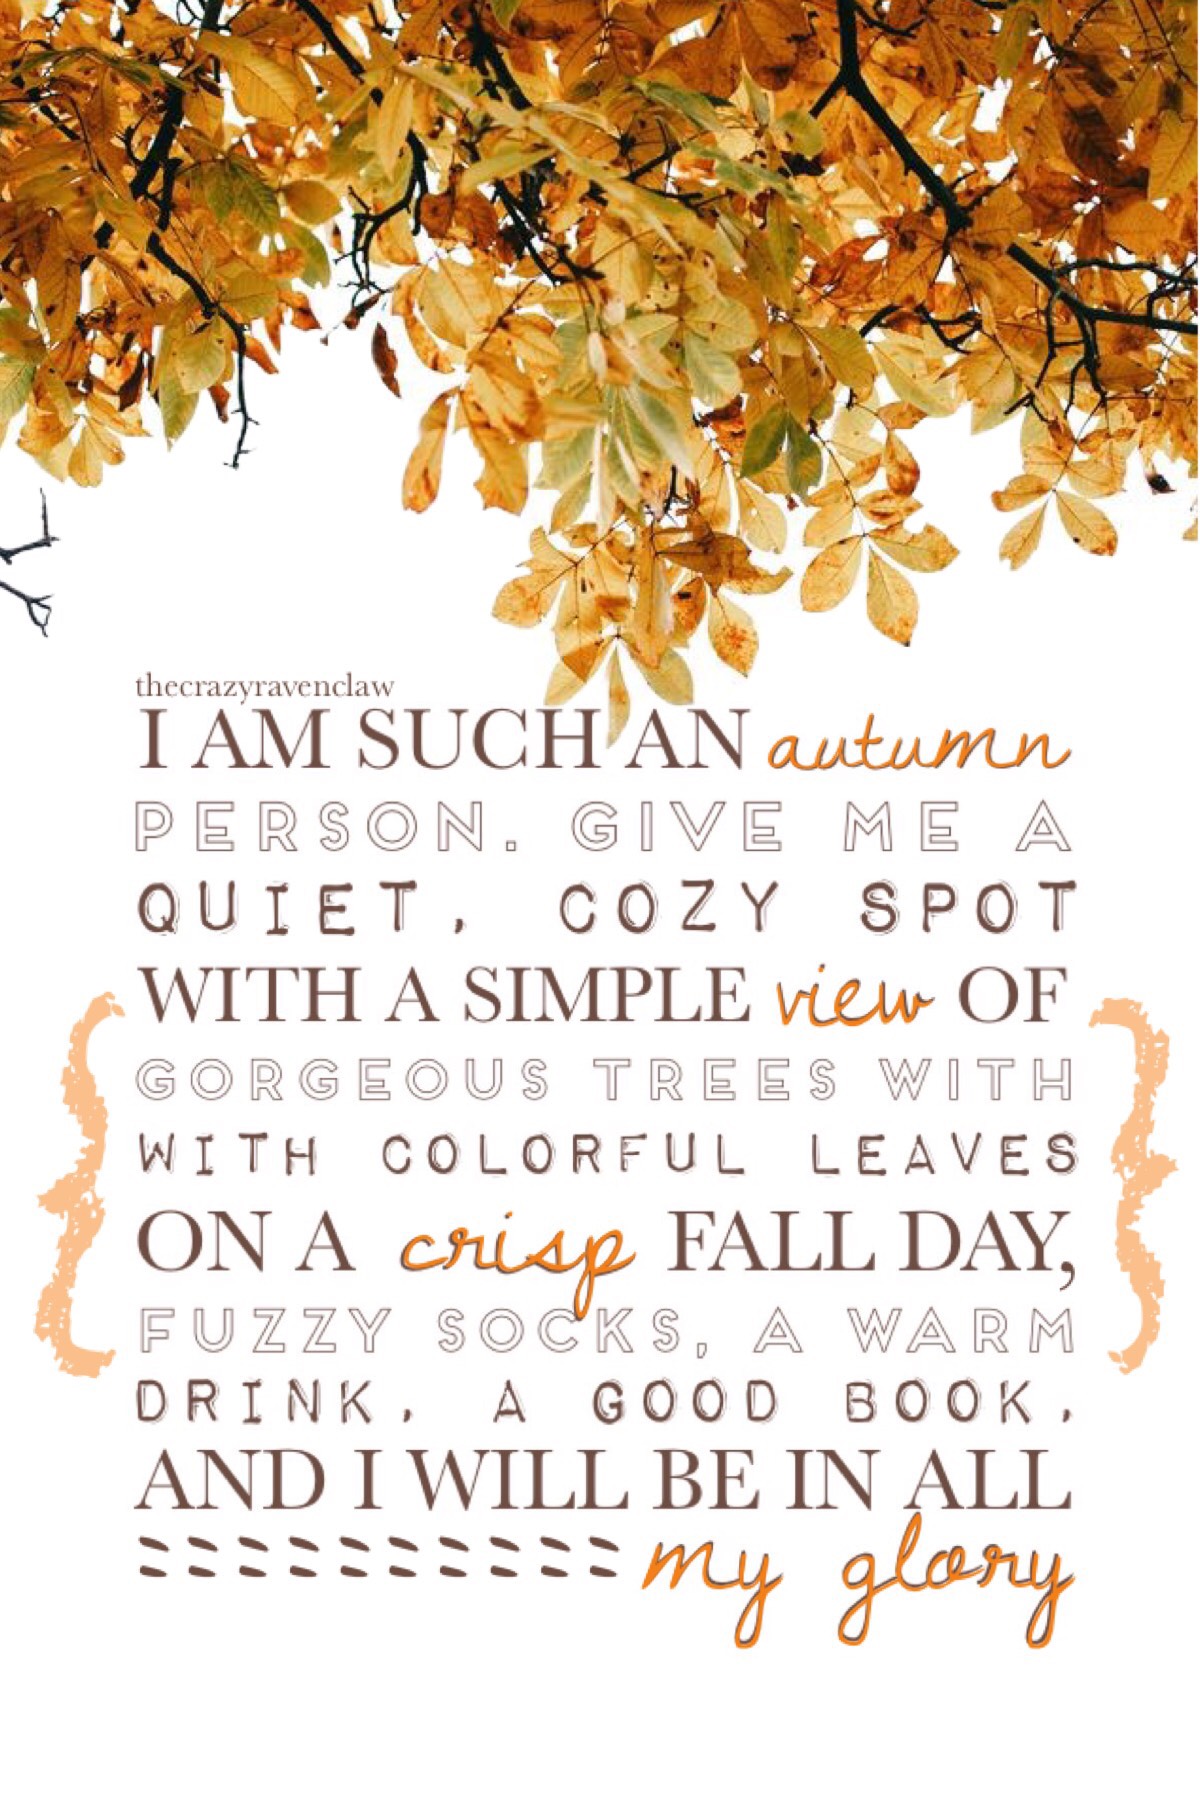 It’s the first day of fall!! Fall is my favorite season 😍 I don’t think this turned out very good but idrc at this point 😂

QOTD: Are the leaves changing color yet where you live?
AOTD: Nope 😥
